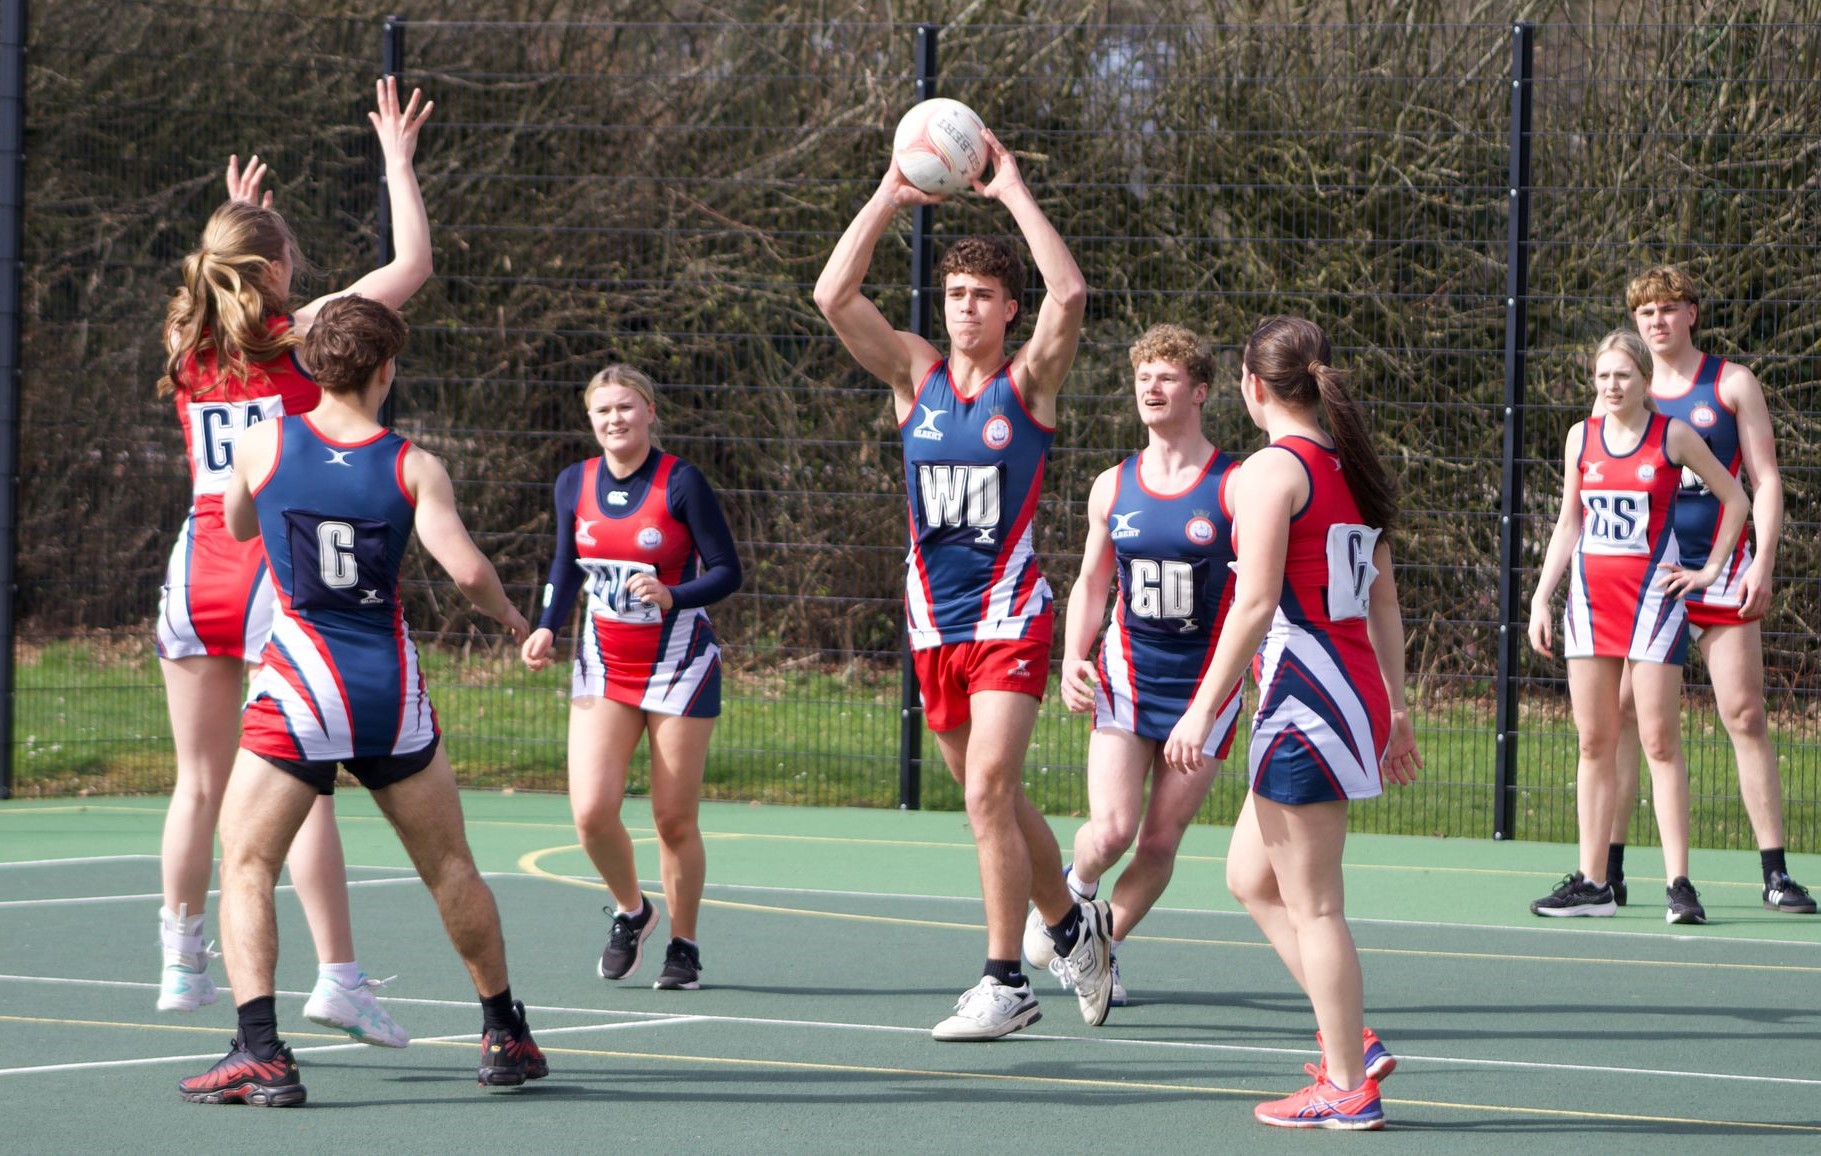 Charity netball match organised by Alice, an Upper Sixth student, supporting Nabugabo